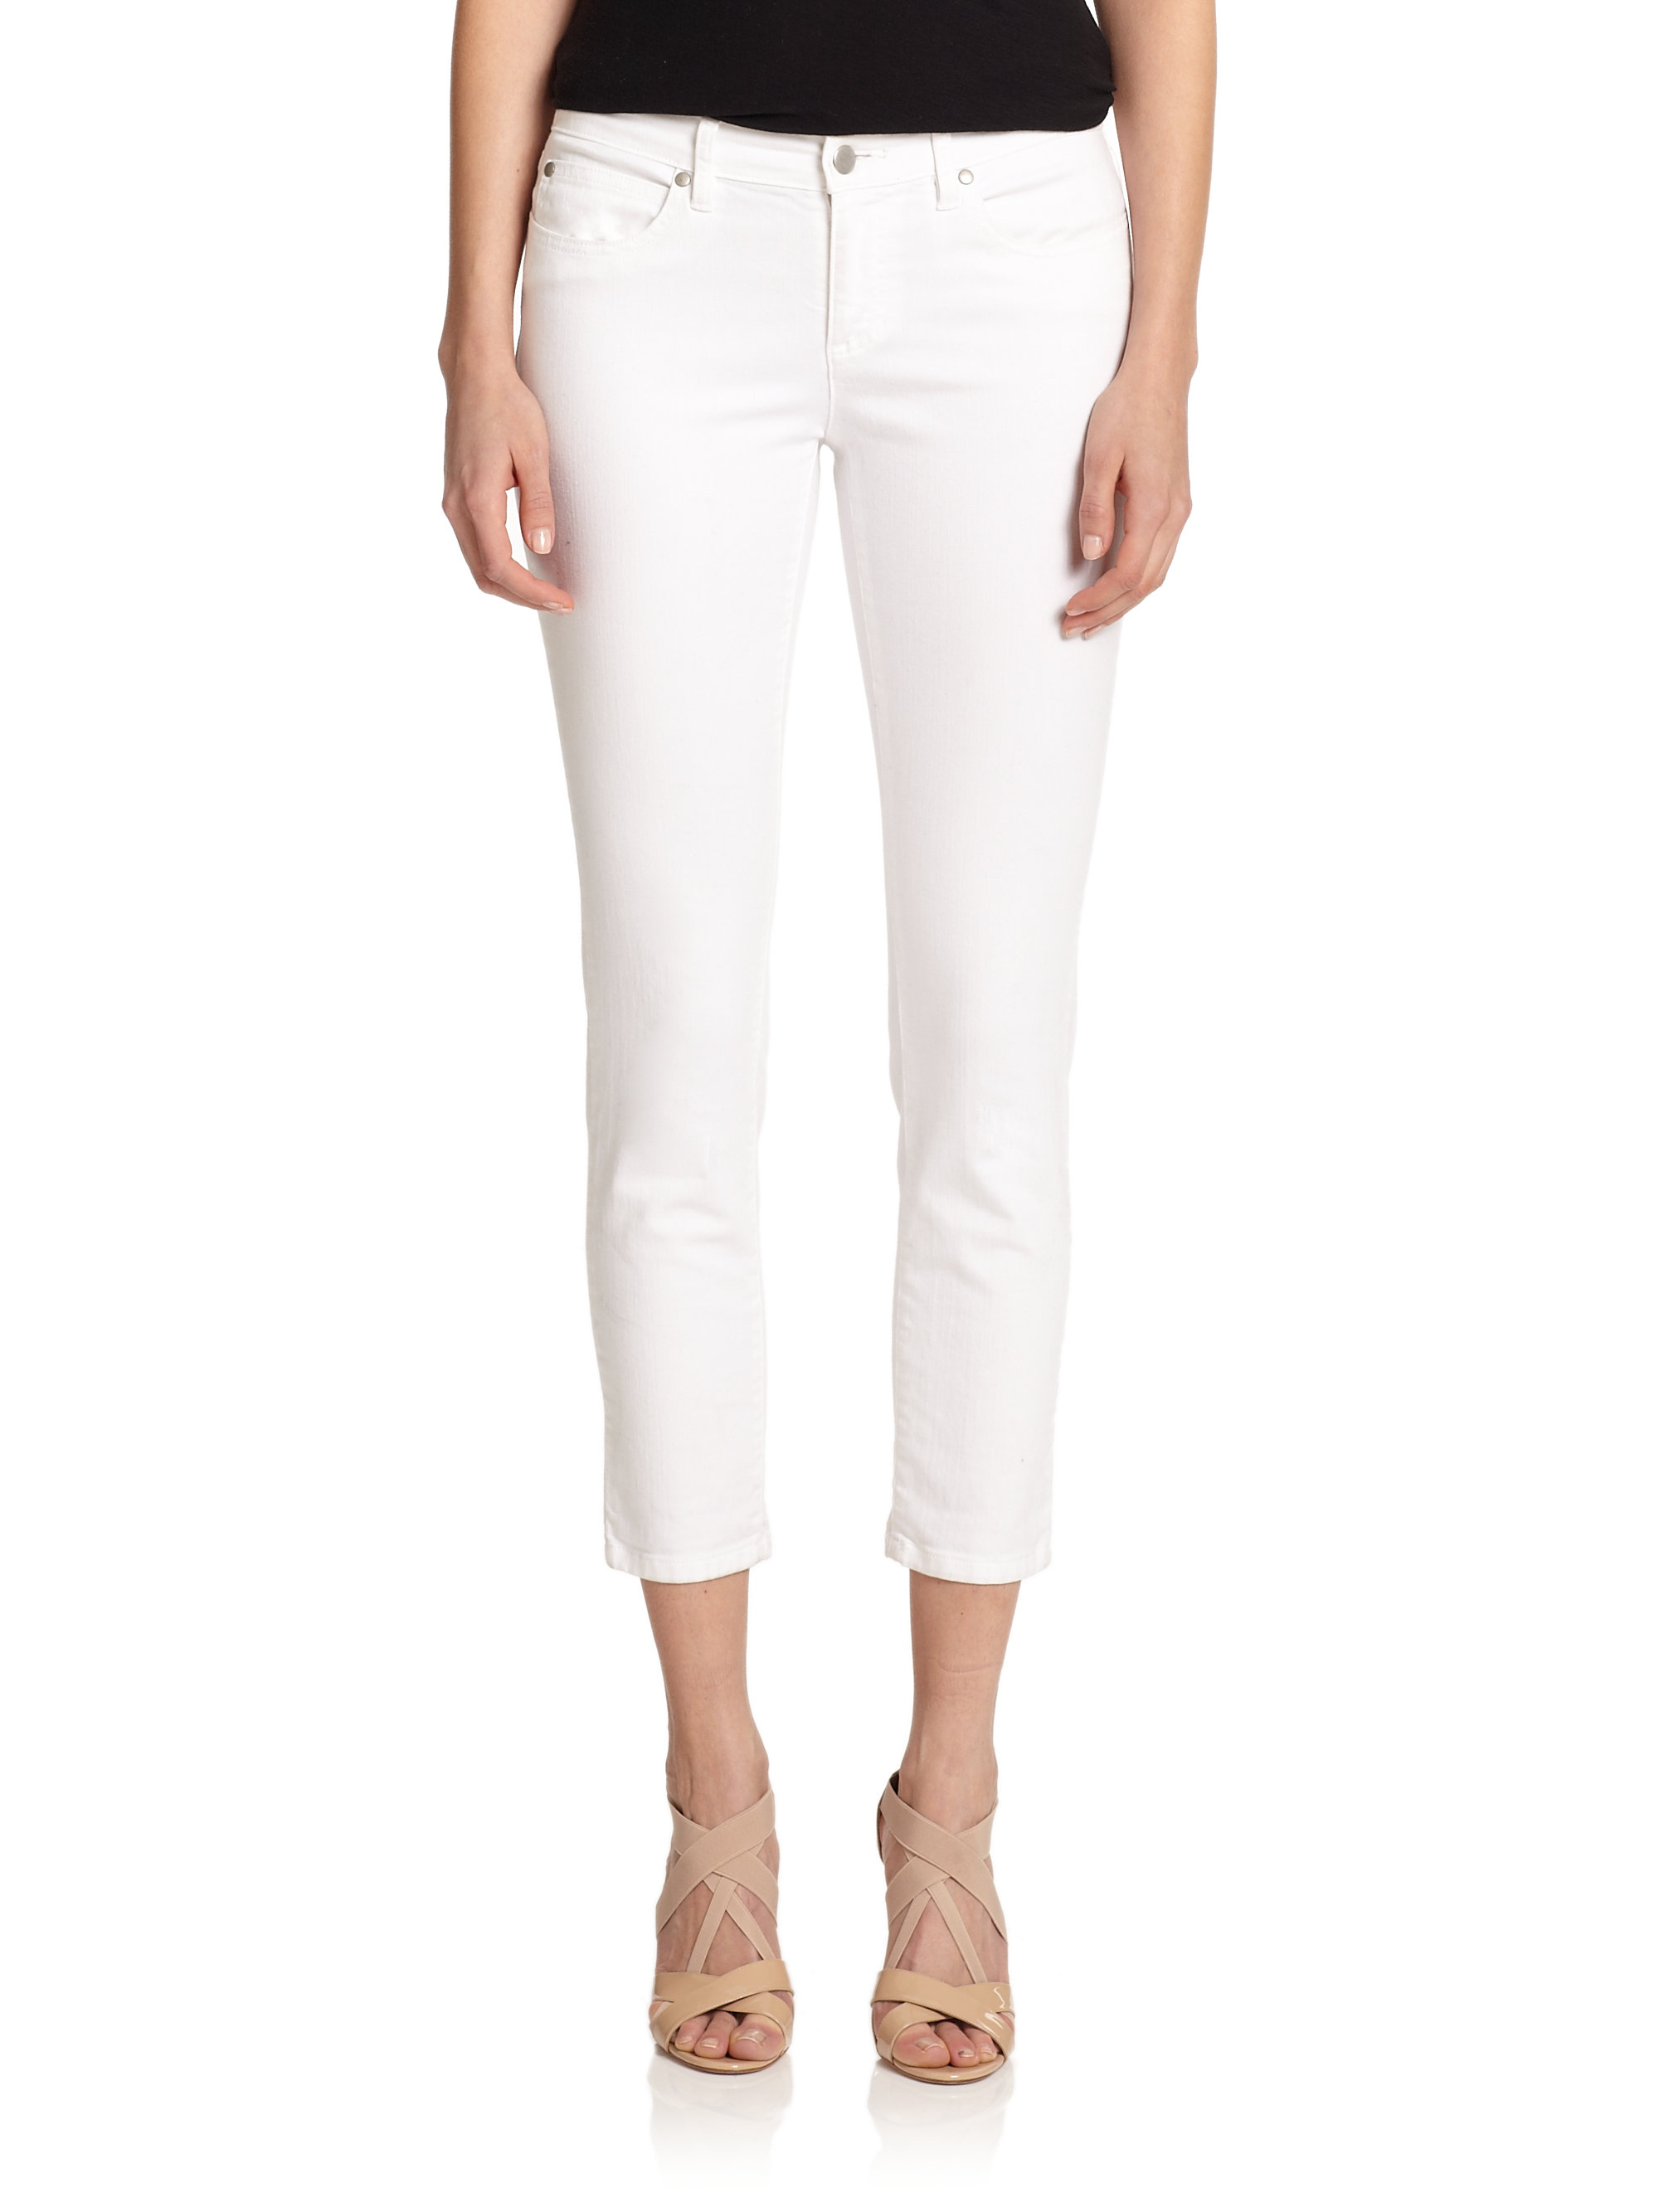 Eileen fisher Skinny Cropped Jeans in White | Lyst